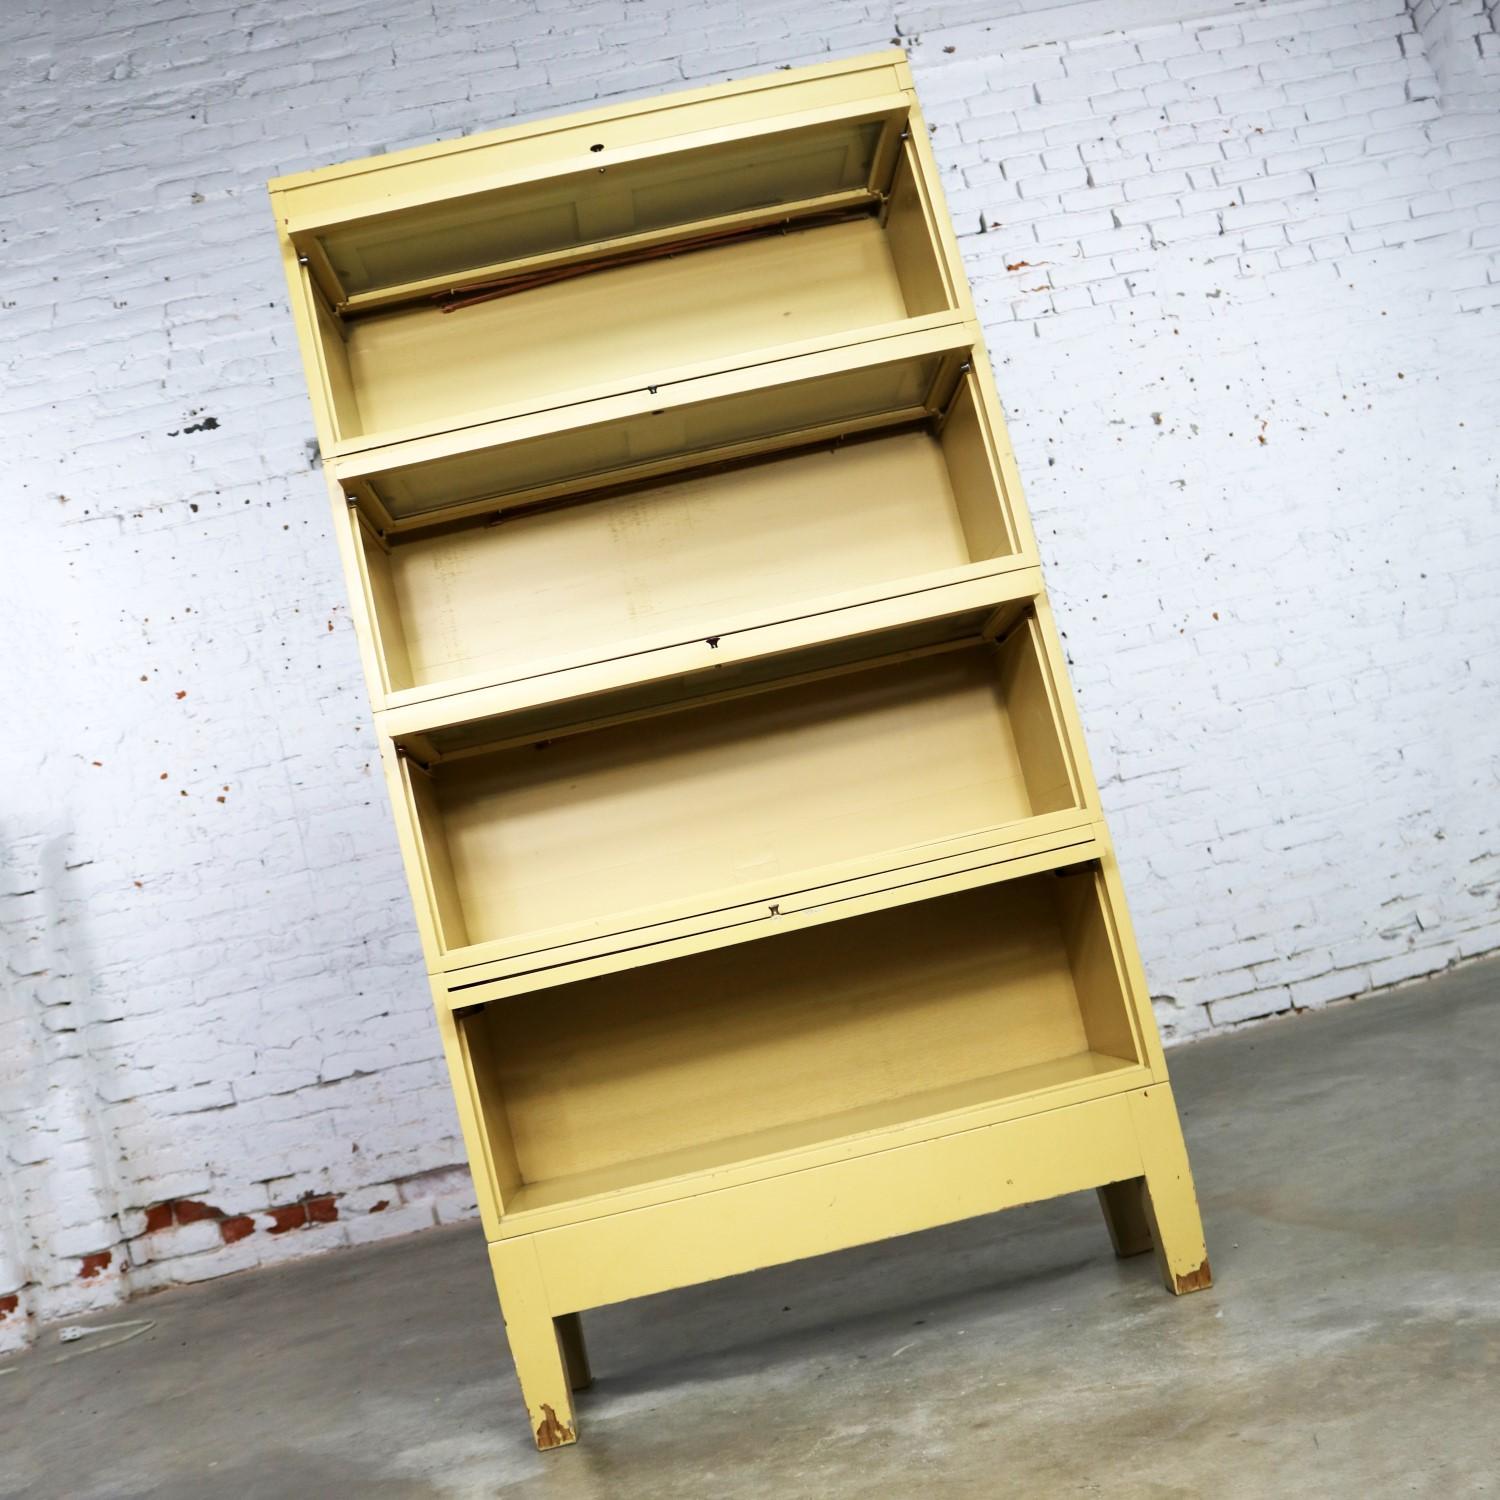 20th Century Industrial Barrister Stacking Bookcase Globe Wernicke Distressed Yellow Painted